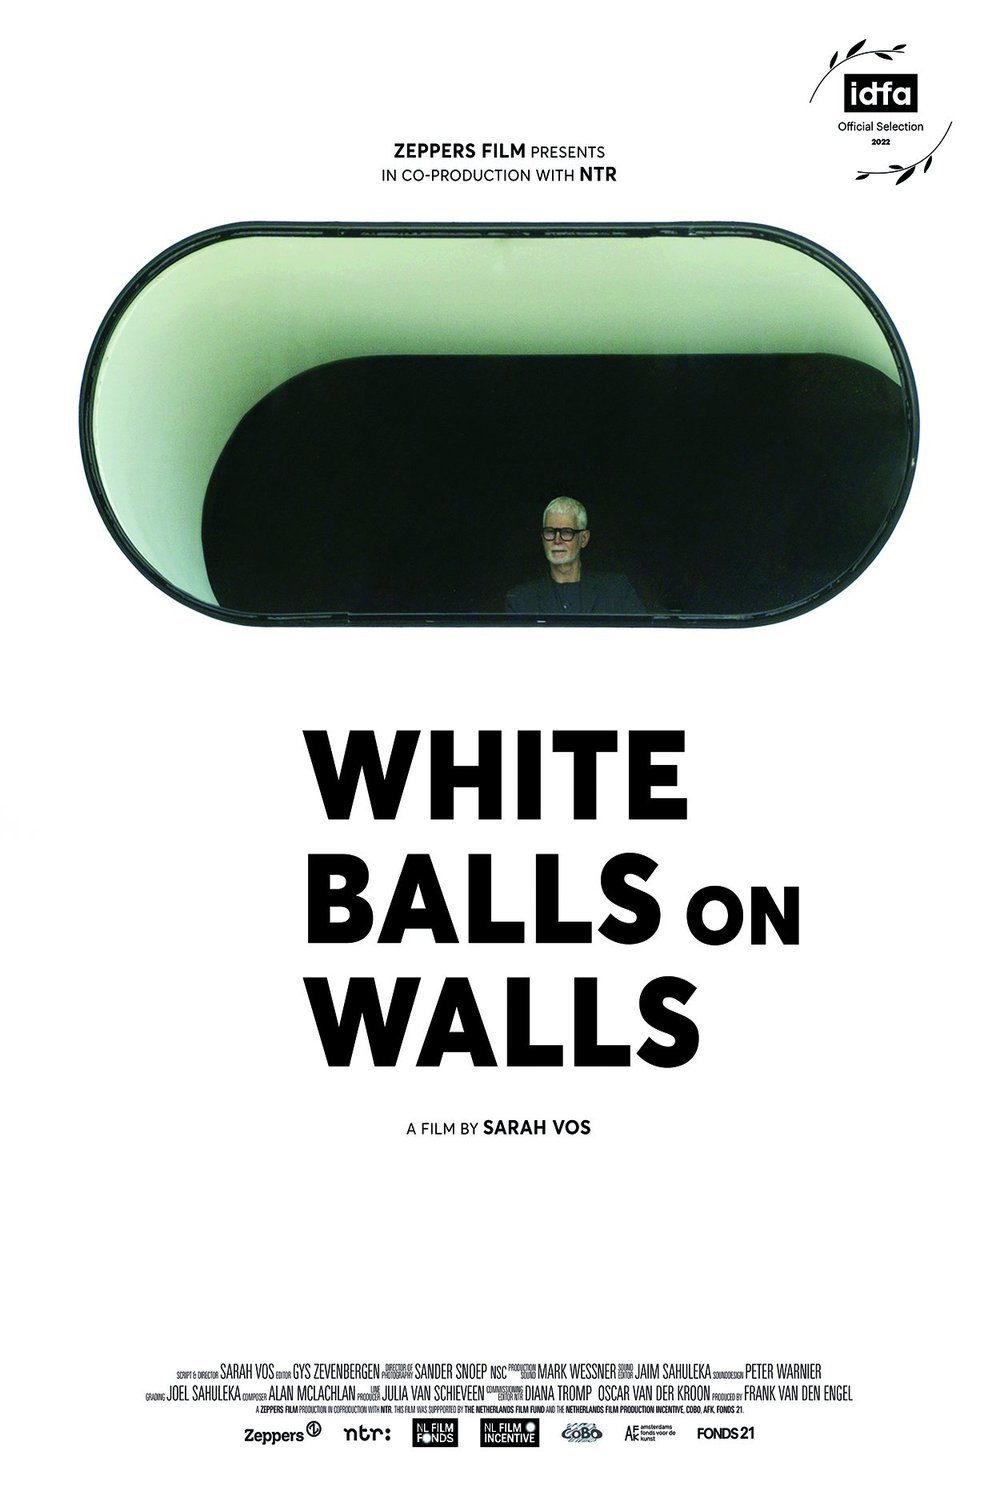 German poster of the movie White Balls on Walls